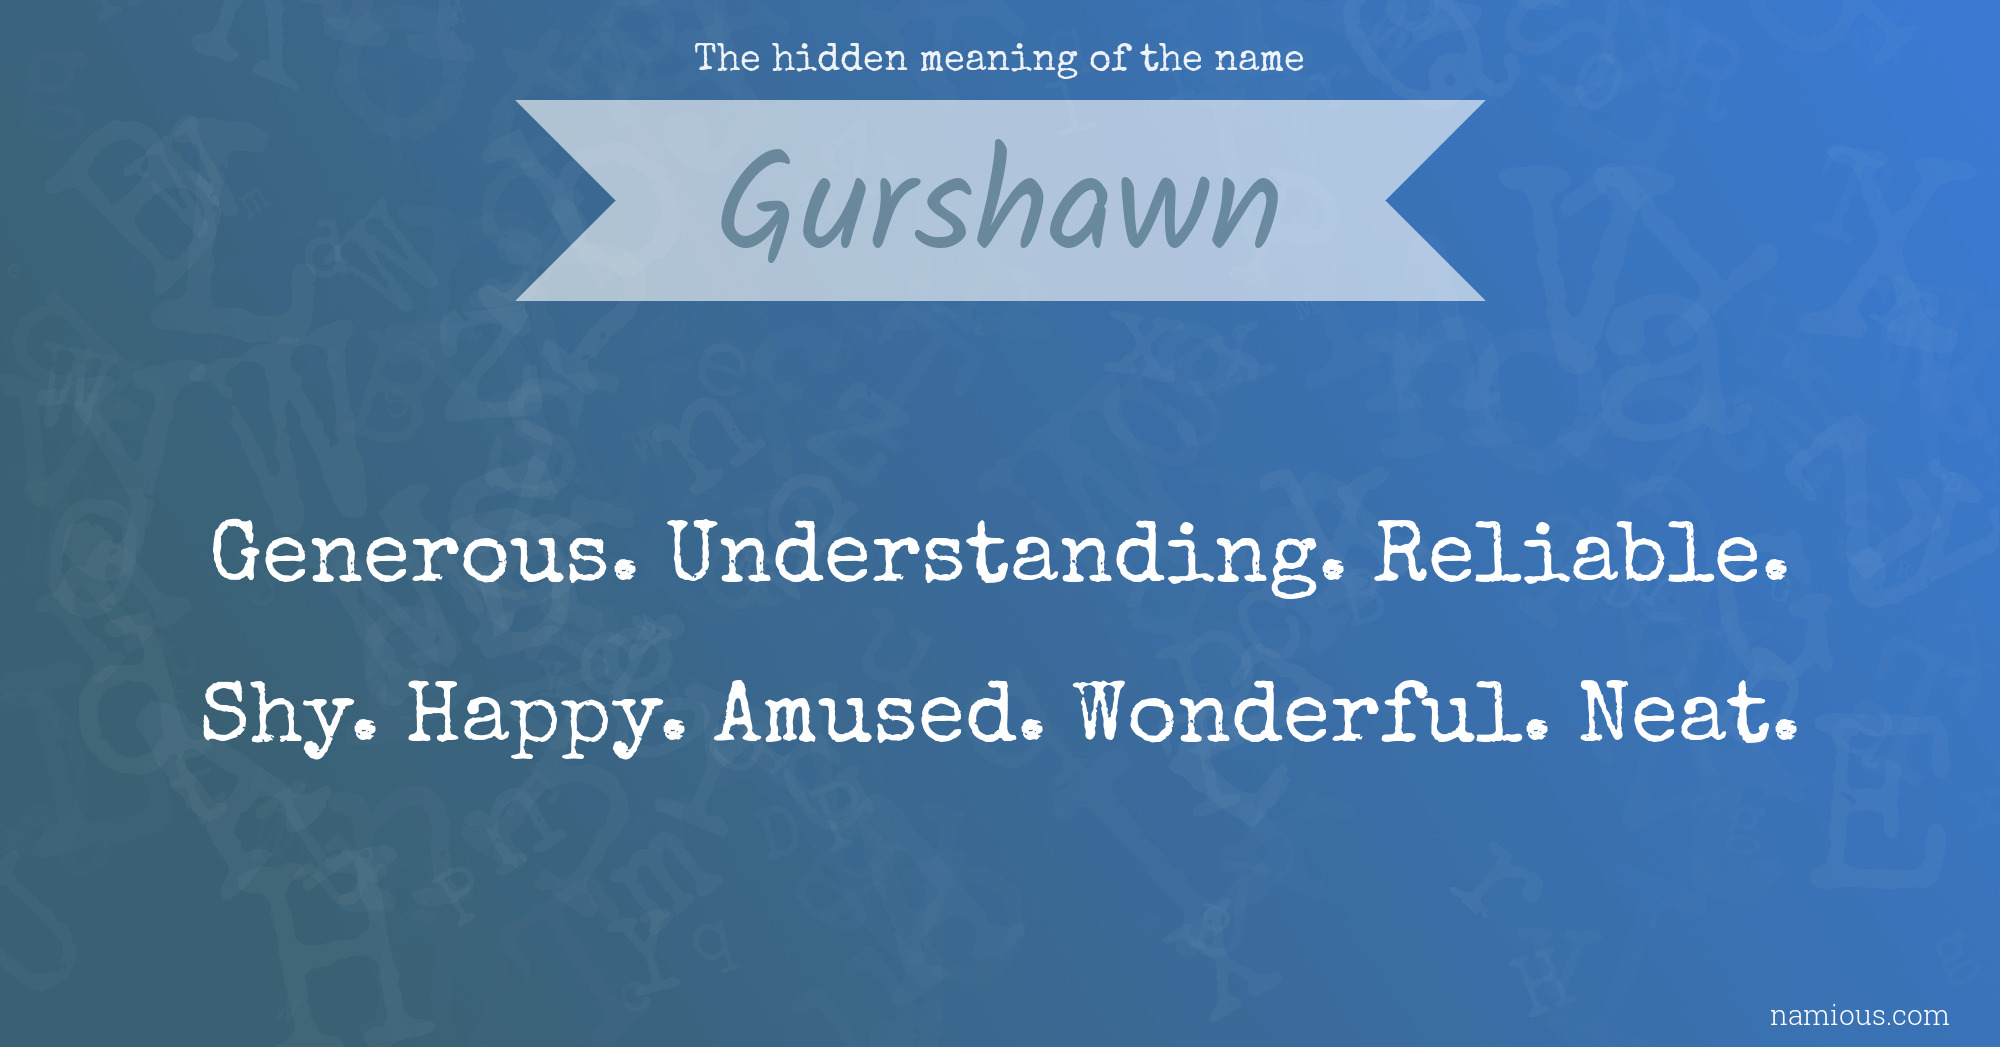 The hidden meaning of the name Gurshawn